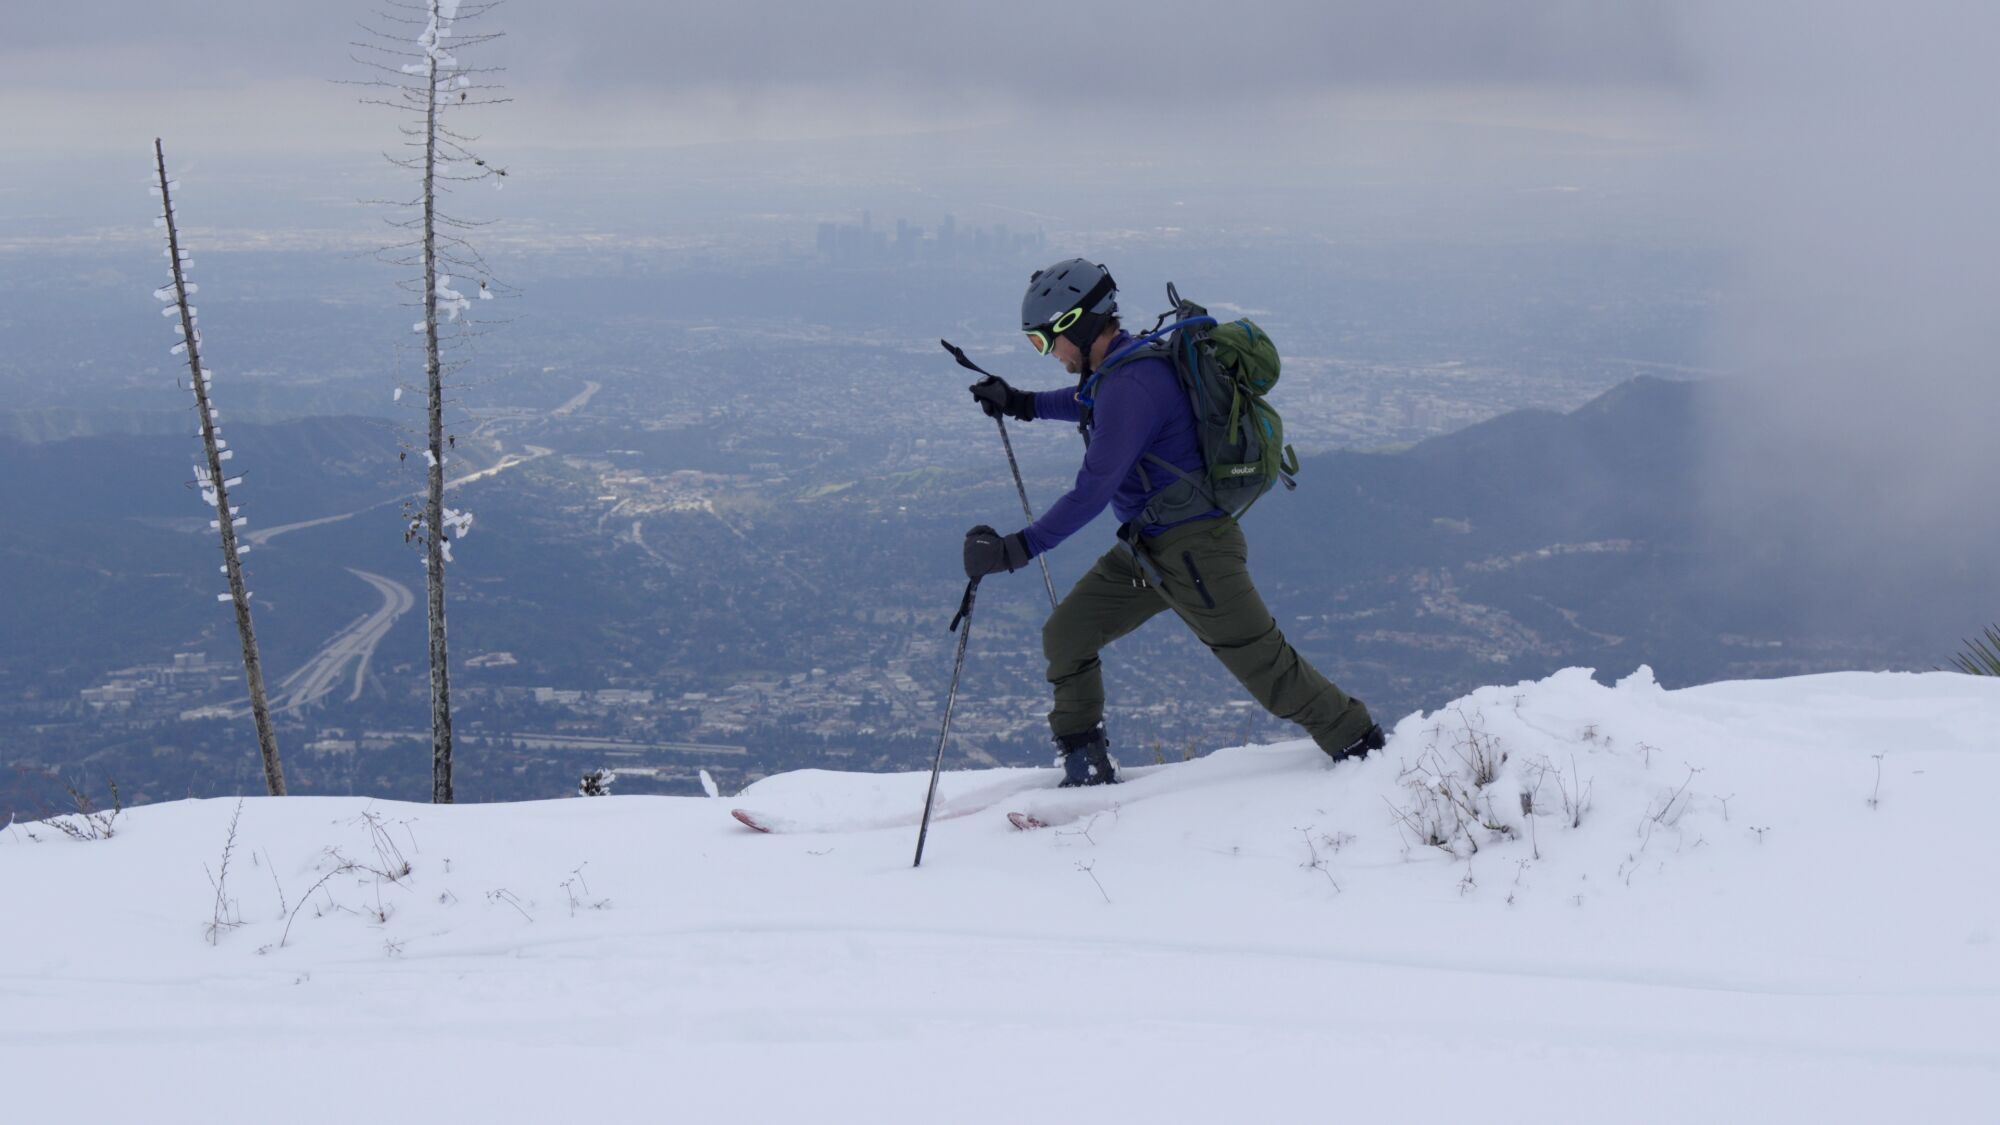 Matt Dixon skis along the east ridge of Mt. Lukens with the downtown Los Angeles skyline in the distance.